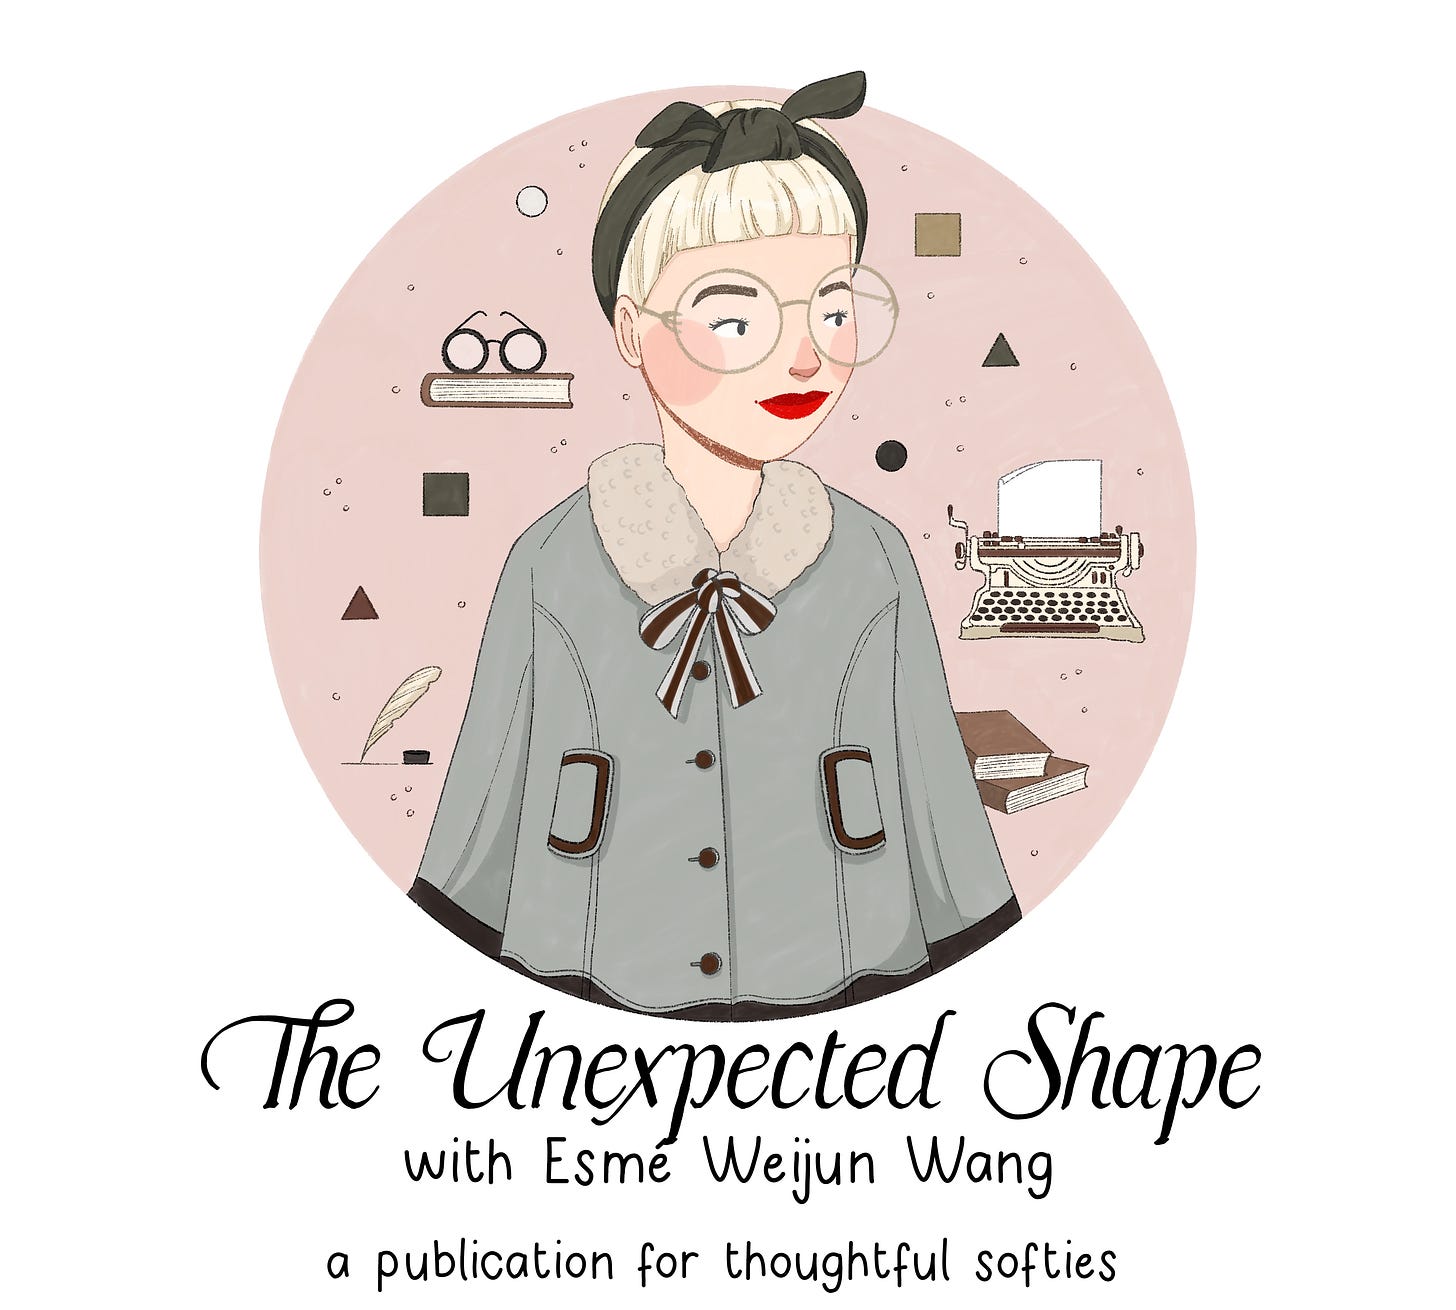 an illustrated portait of a blond woman with glasses and a vintage green coat, with a background of typewriters and books; below that is the text The Unexpected Shape with Esmé Weijun Wang, a publication for thoughtful softies